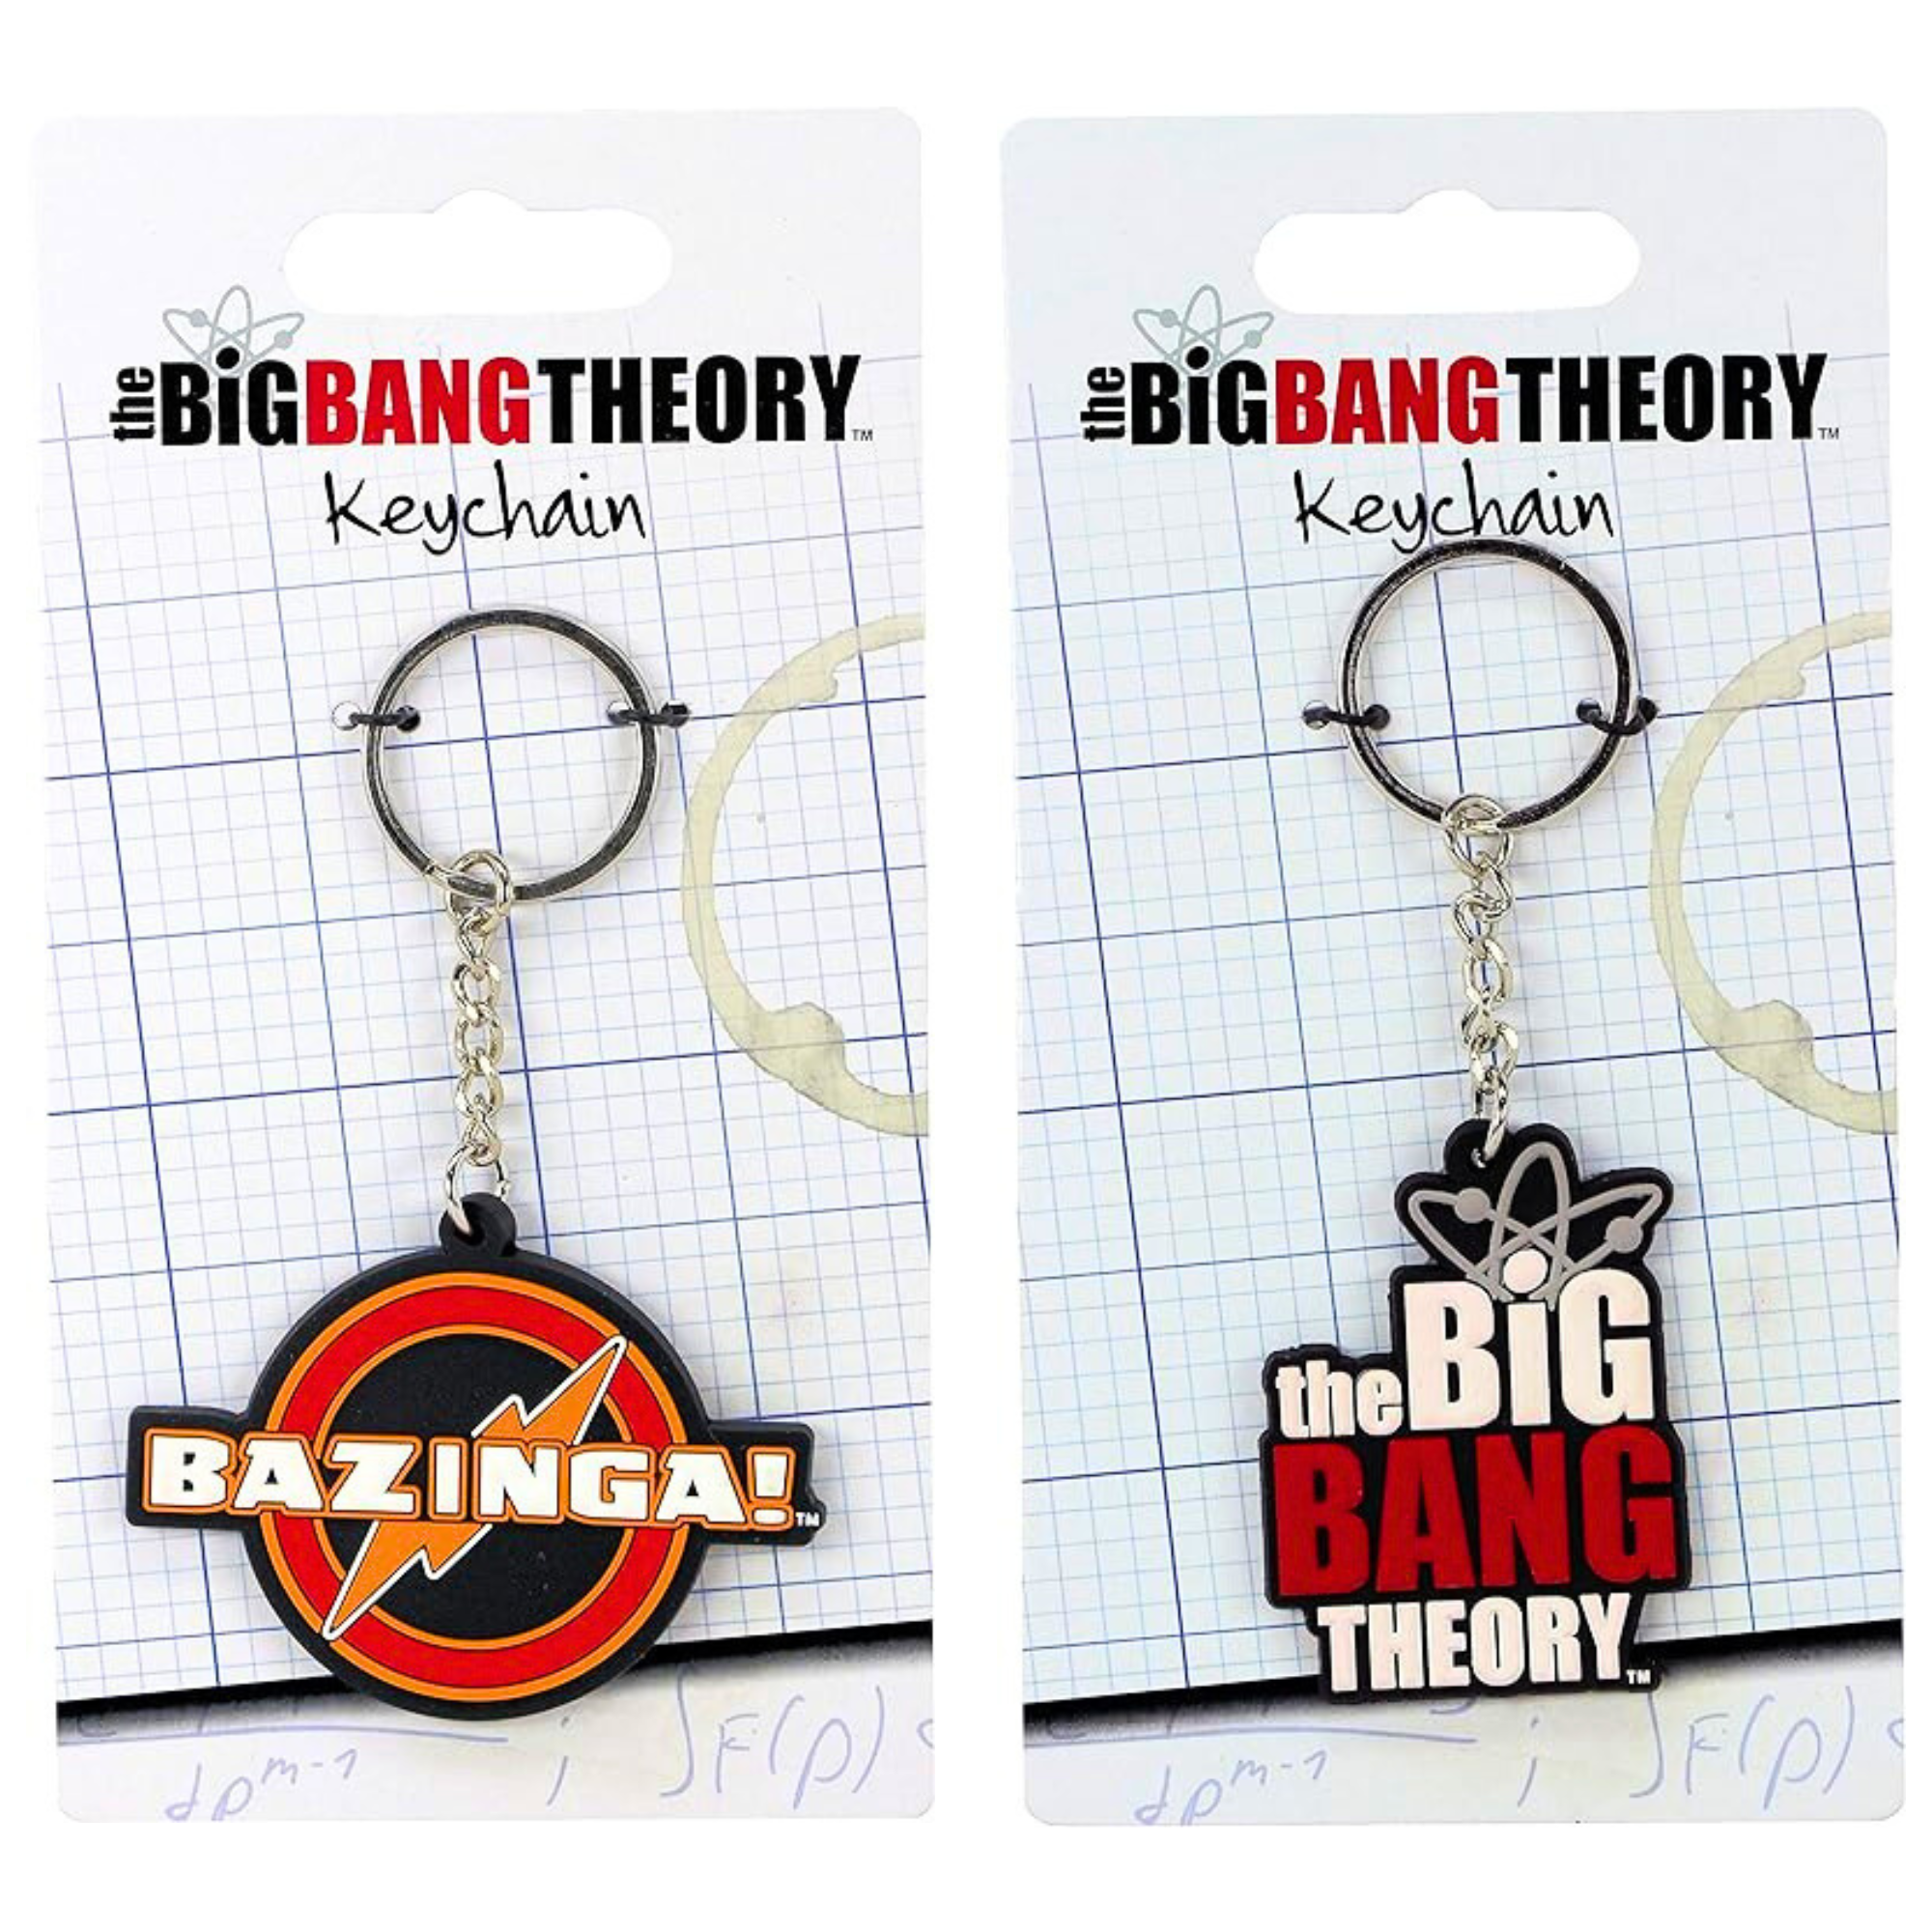 The Big Bang Theory Laser Cut Rubber Keychain Twin Pack - Includes Bazinga and Logo Designs